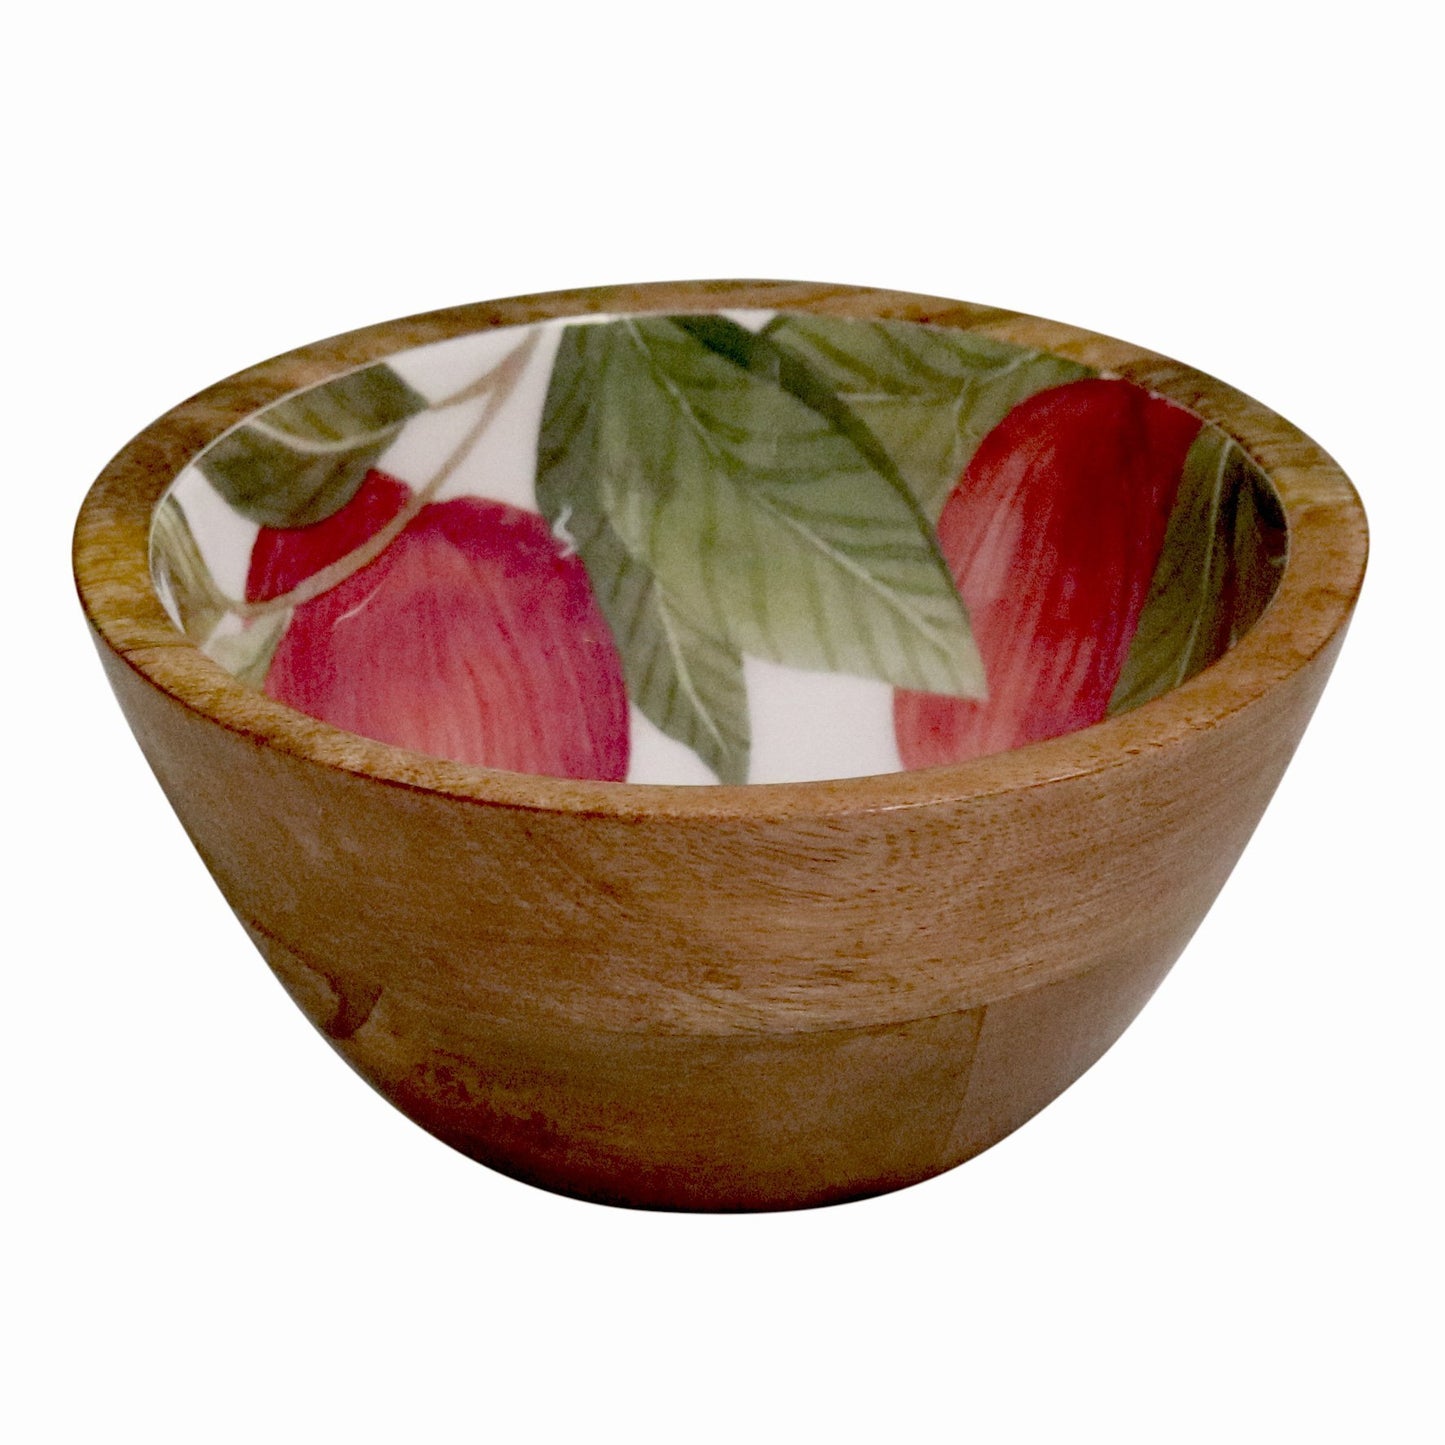 Apples Small Bowl